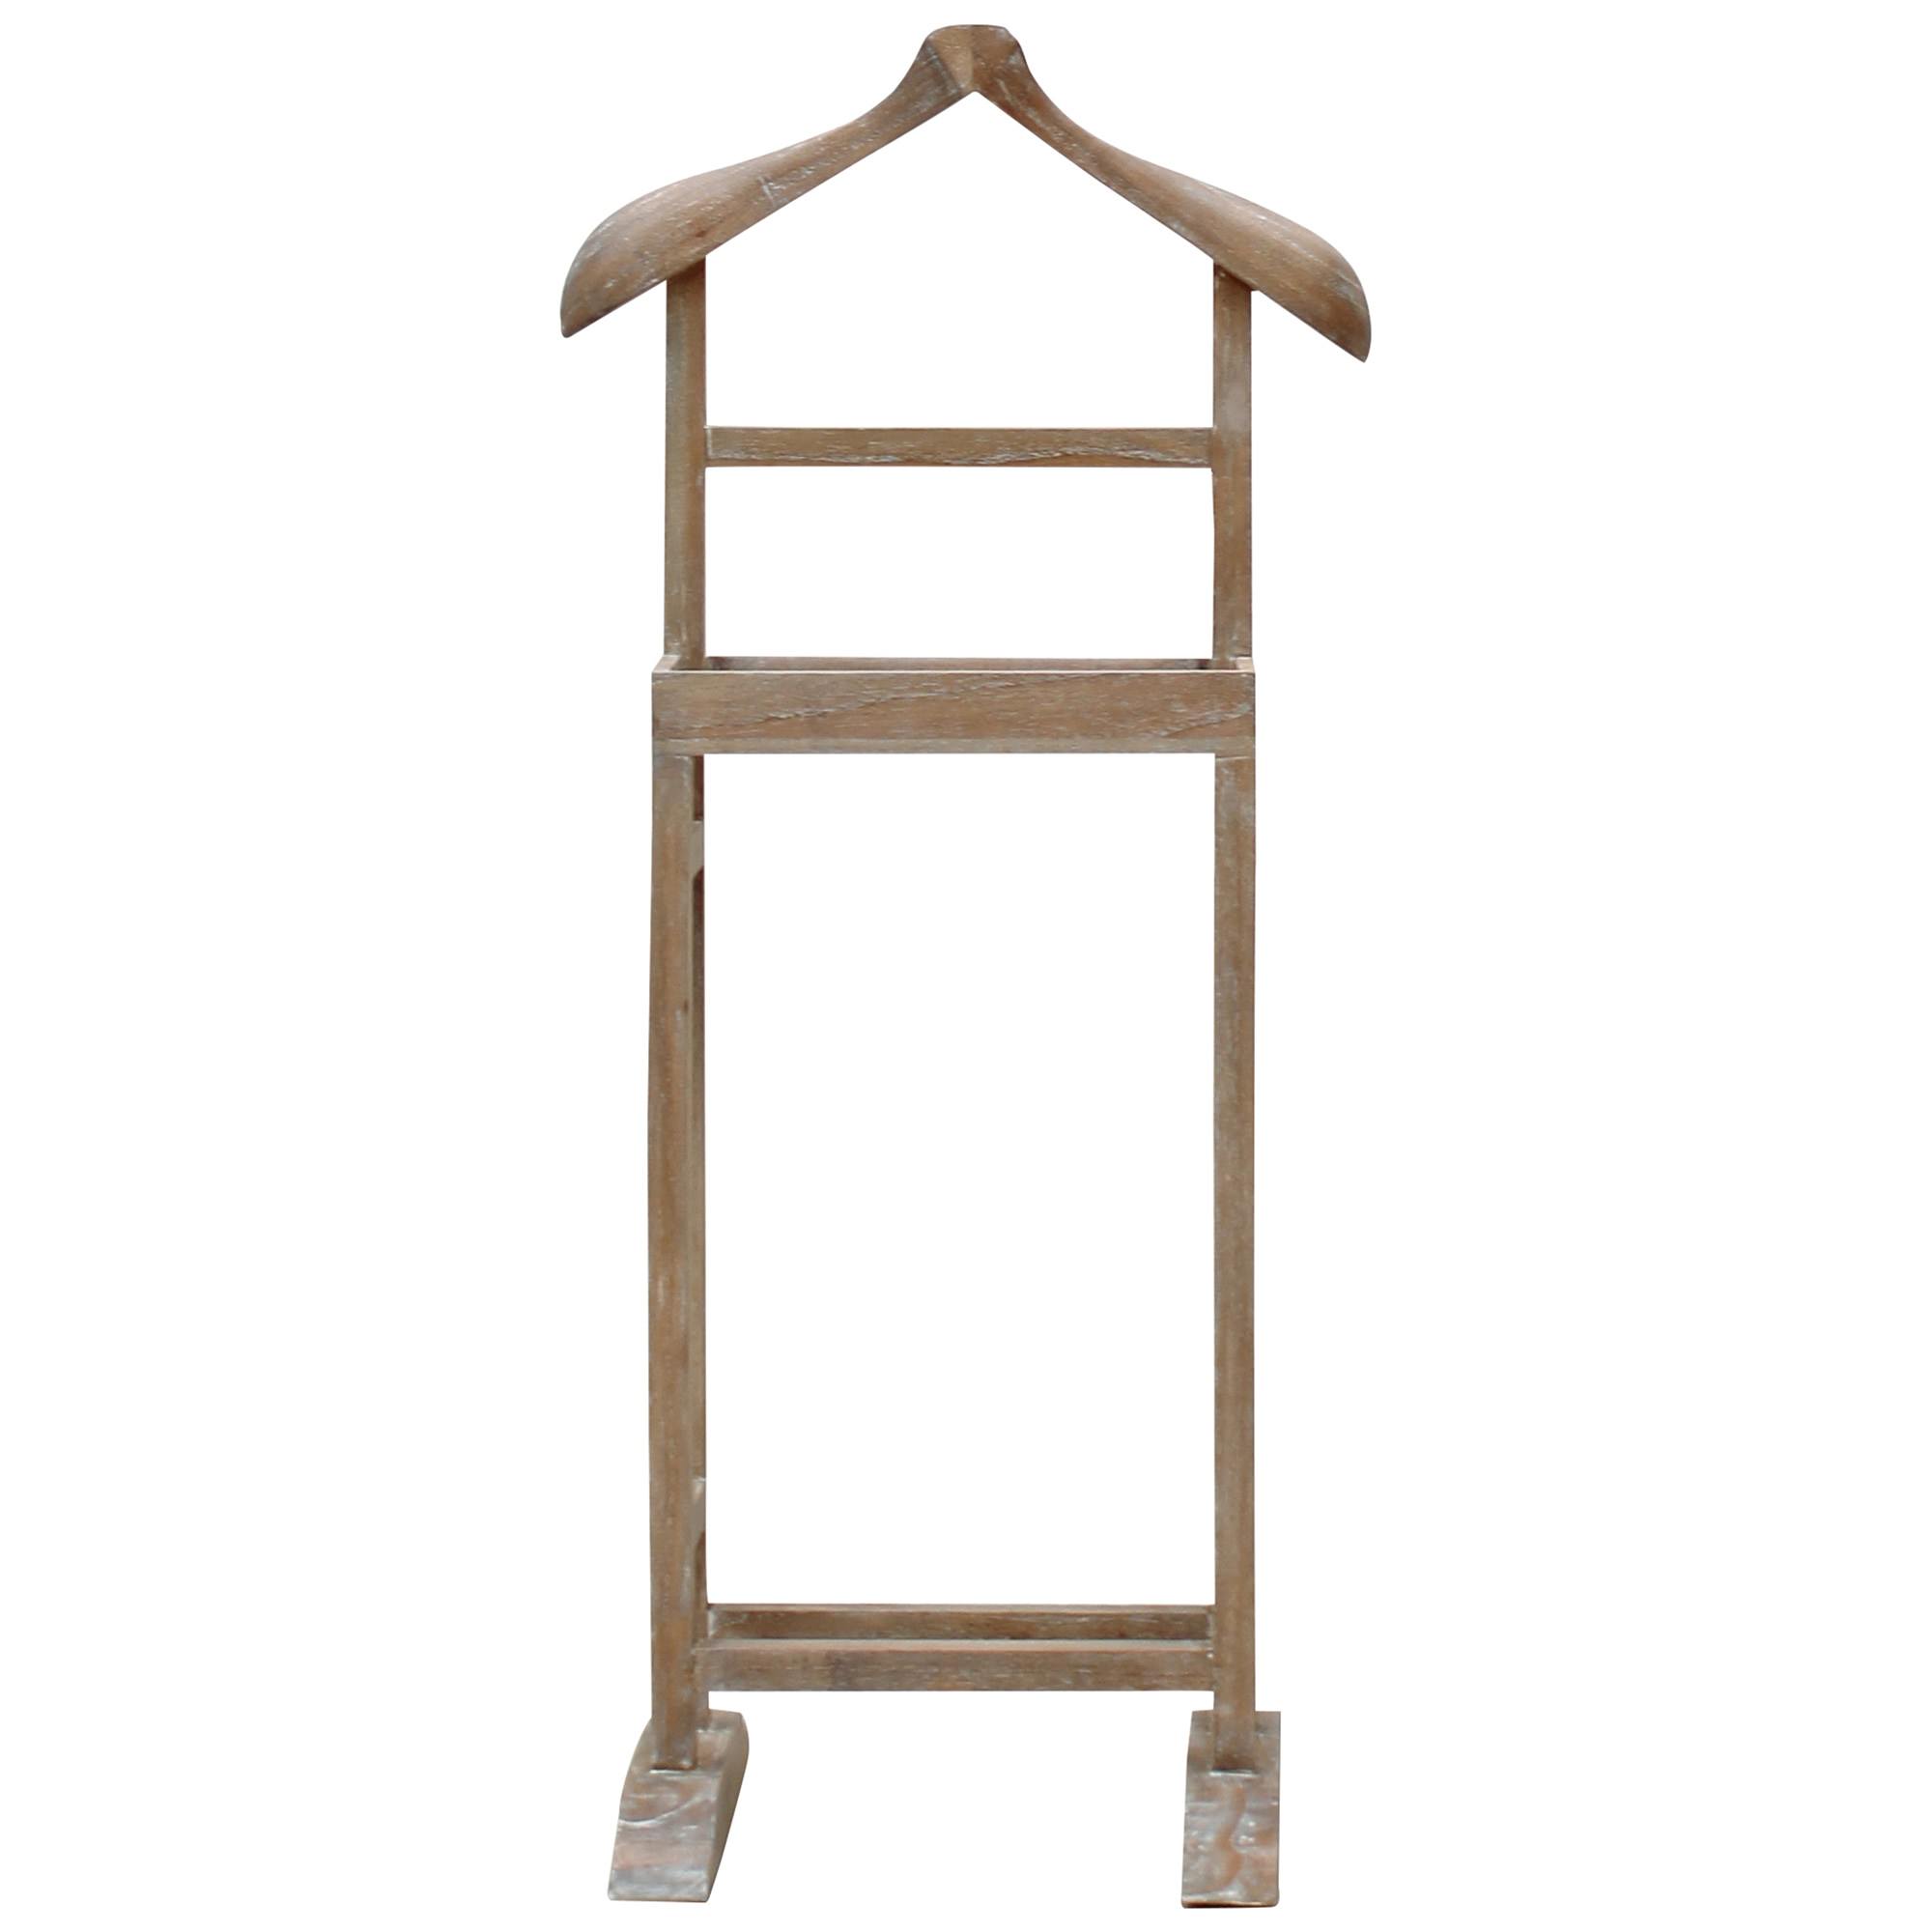 Arlet Hand Crafted Mango Wood Valet Stand, Weathered Oak